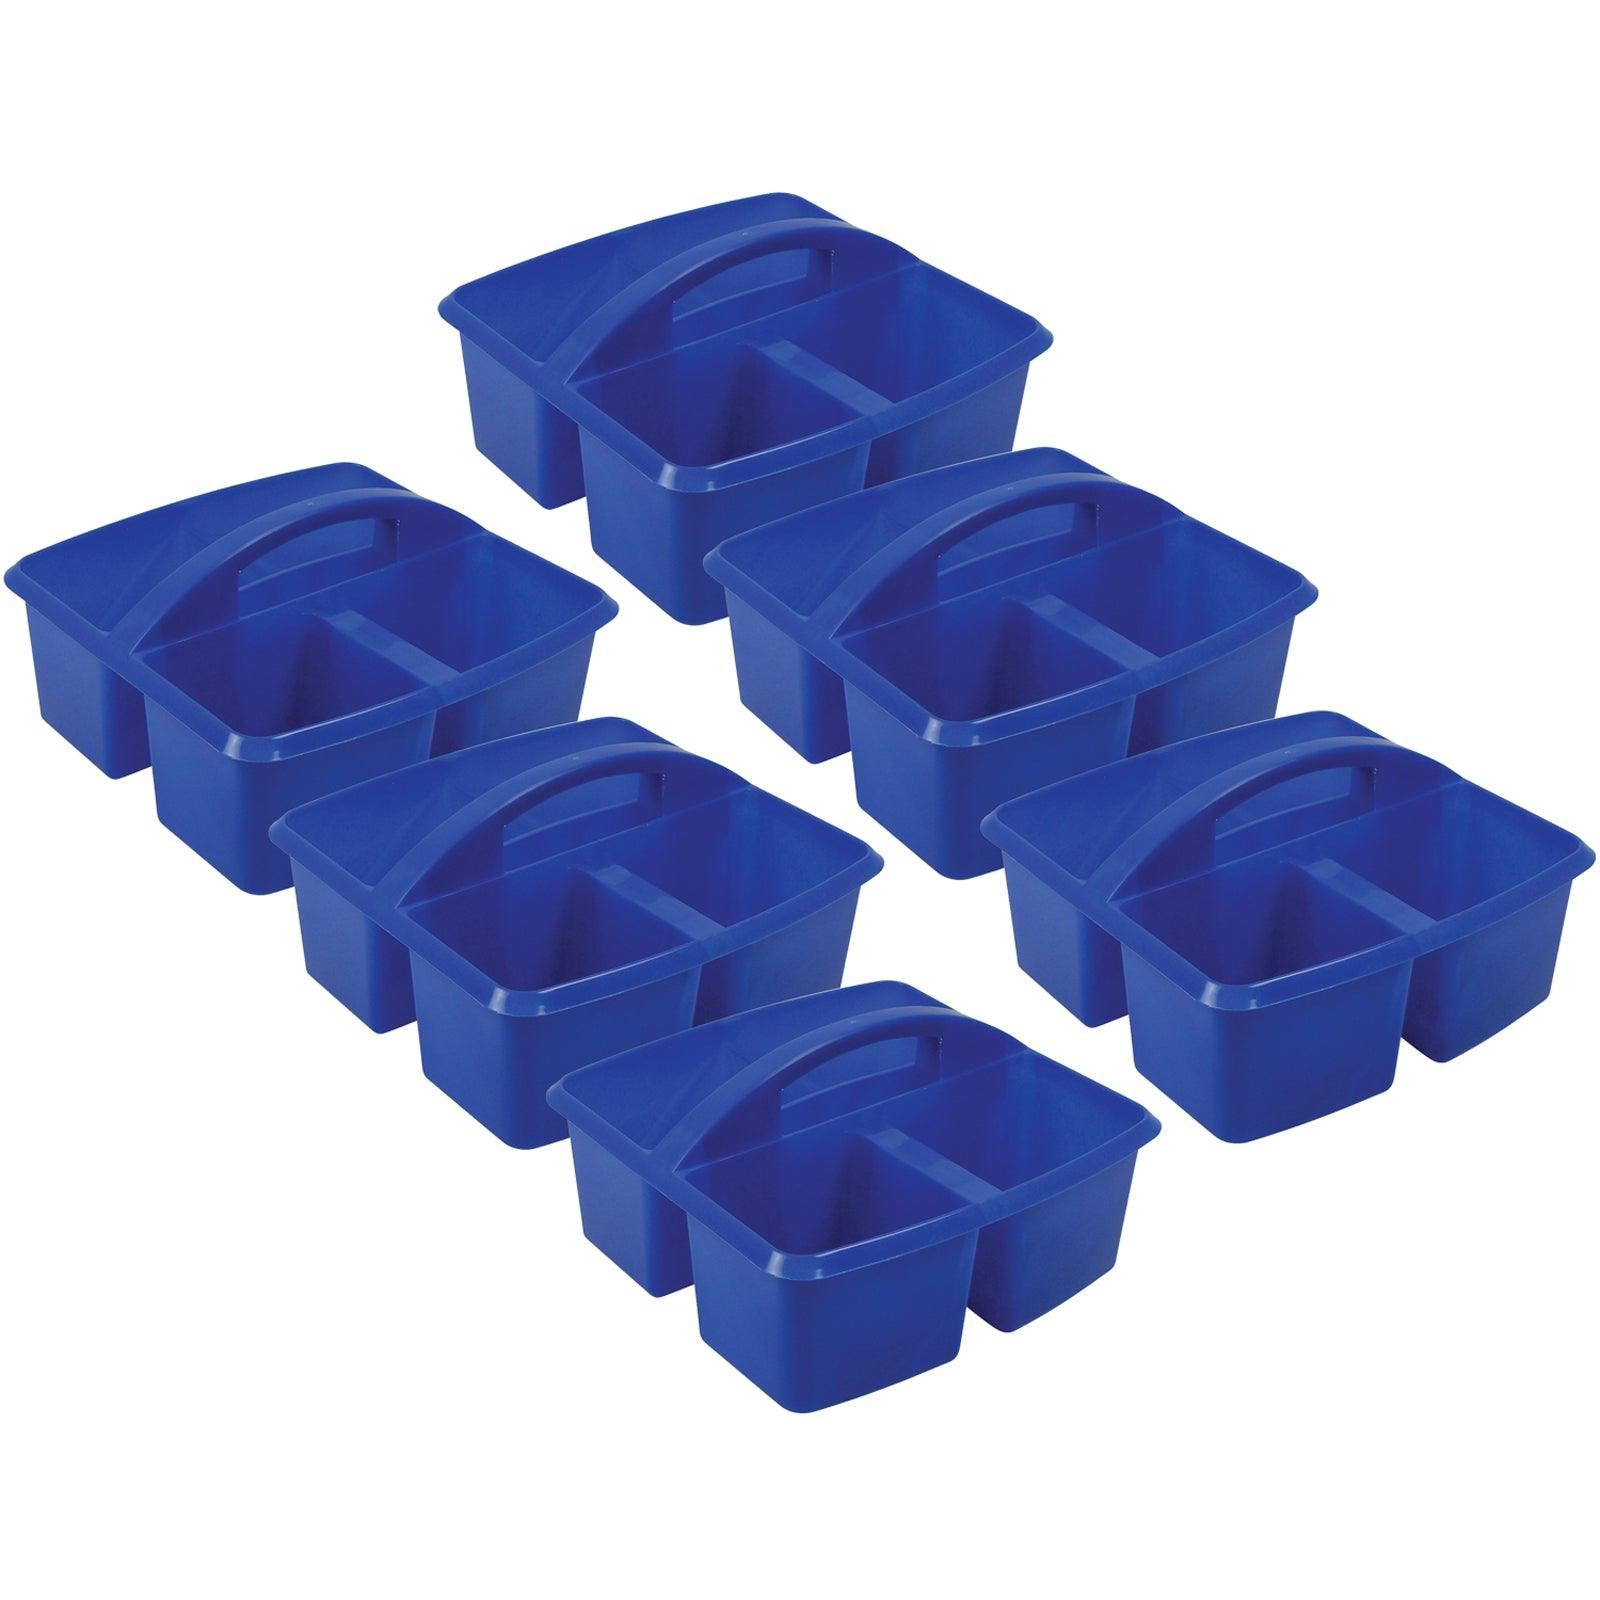 Small Utility Caddy, Blue, Pack of 6 - Loomini